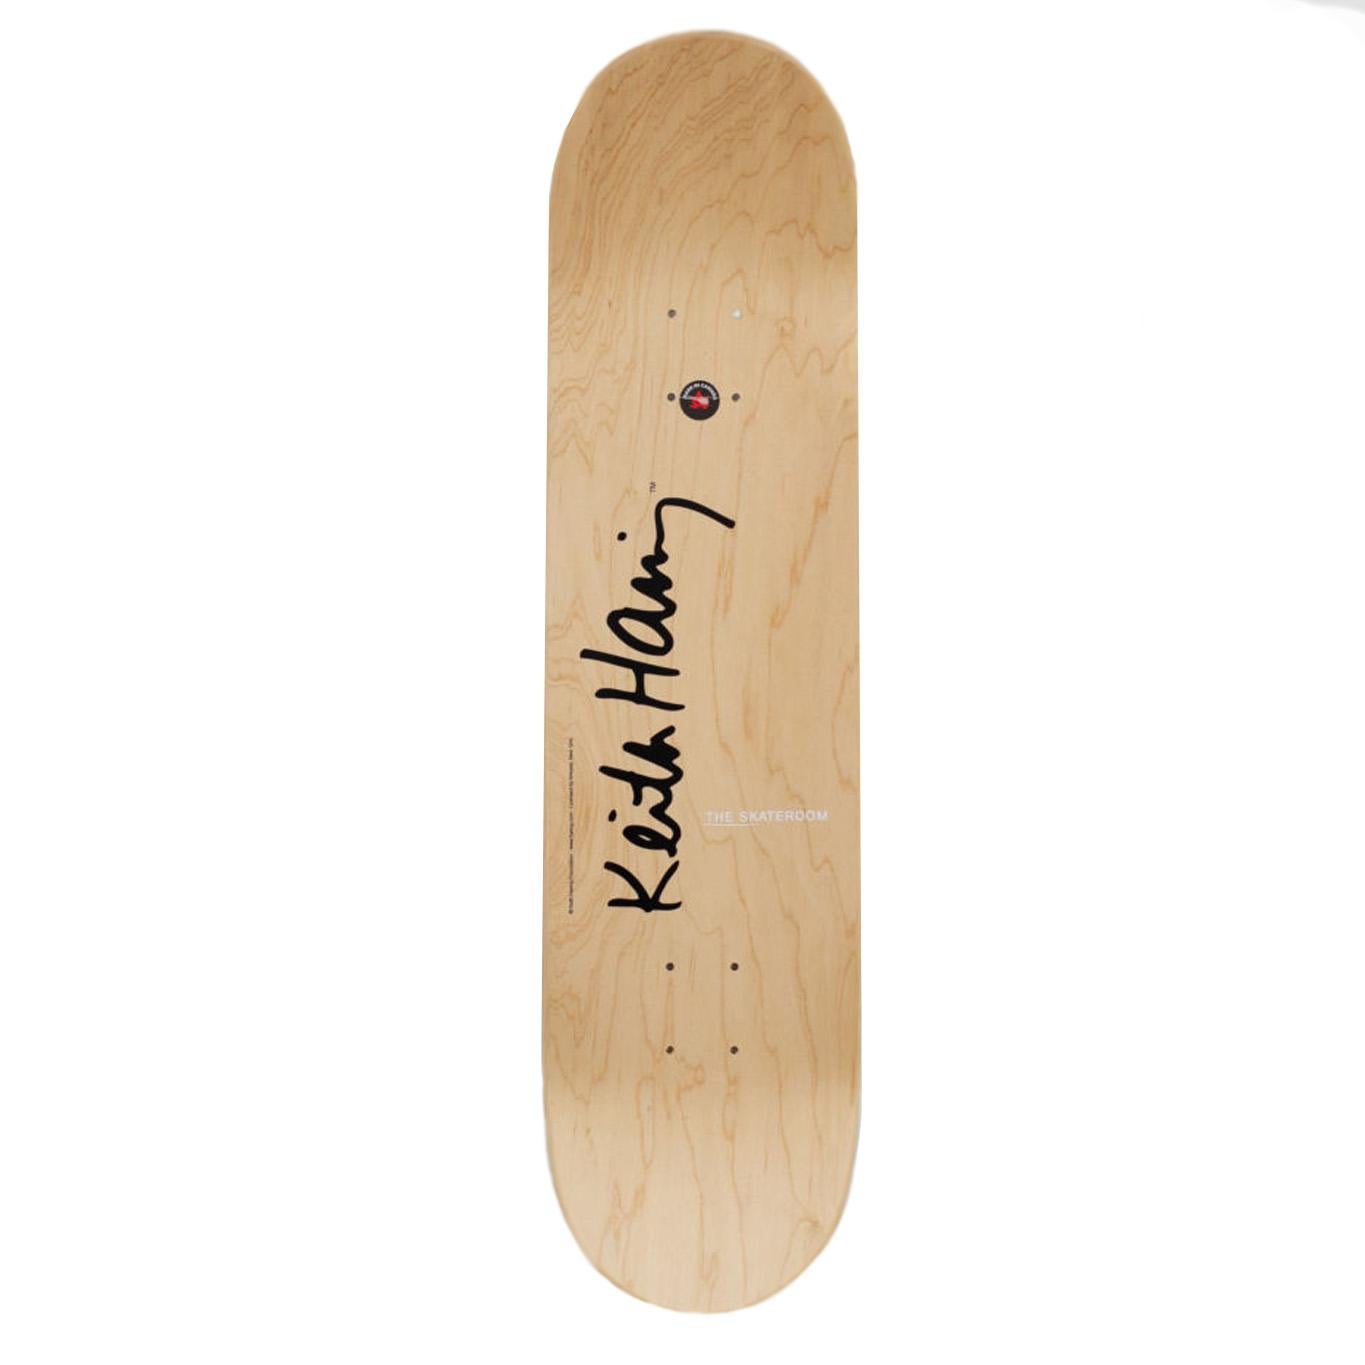 Belgian Untitled 'Smile on Stripes' Skateboard Deck by Keith Haring For Sale